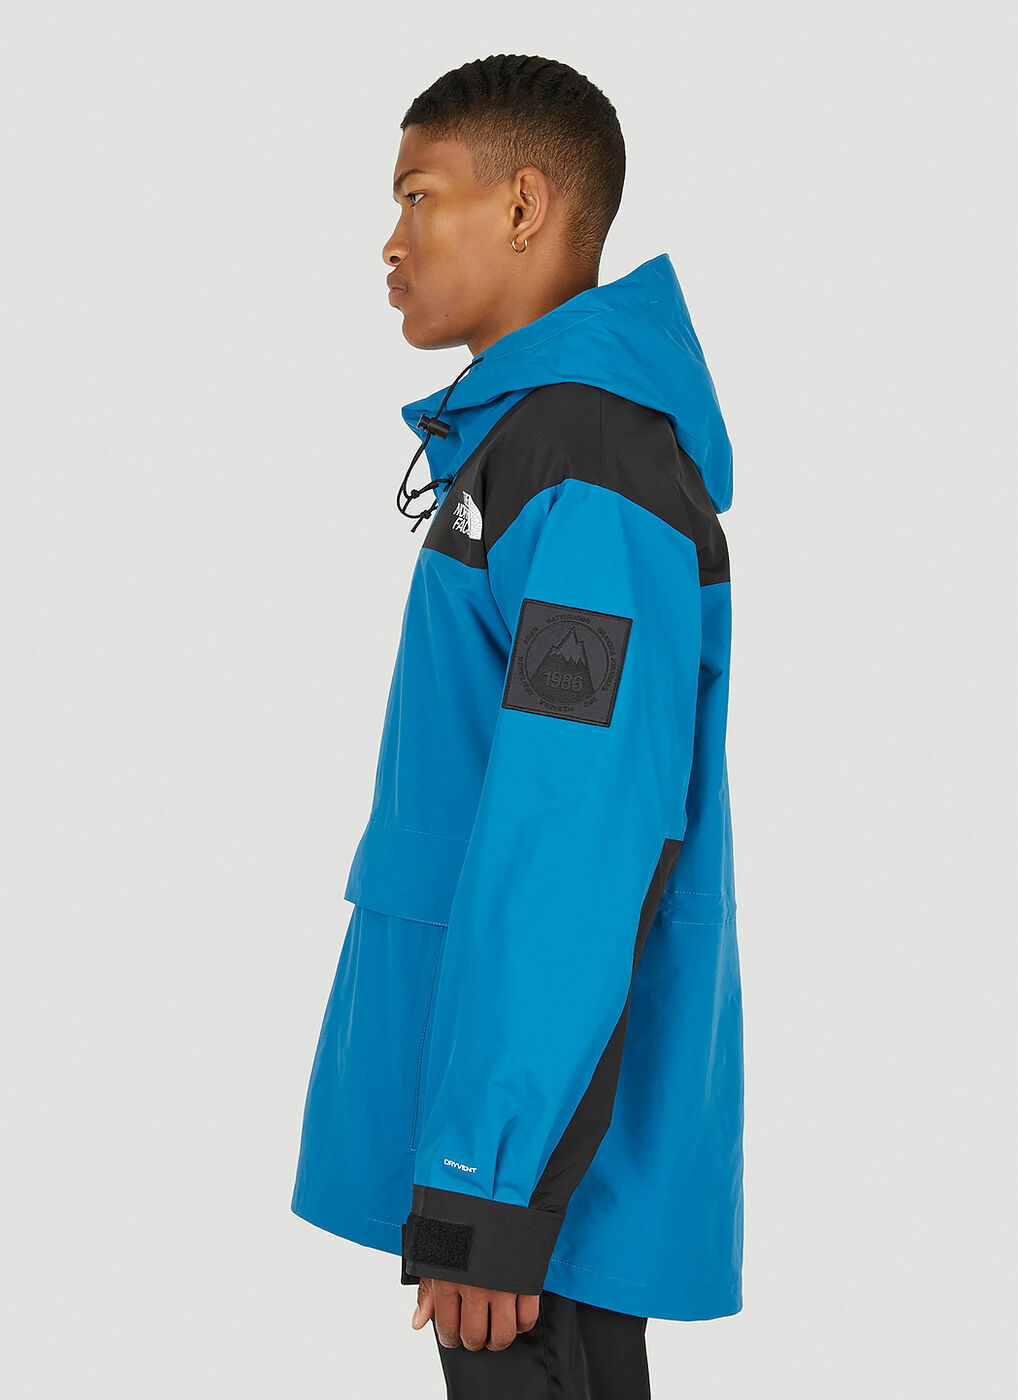 Origins 86 Mountain Jacket in Blue The North Face